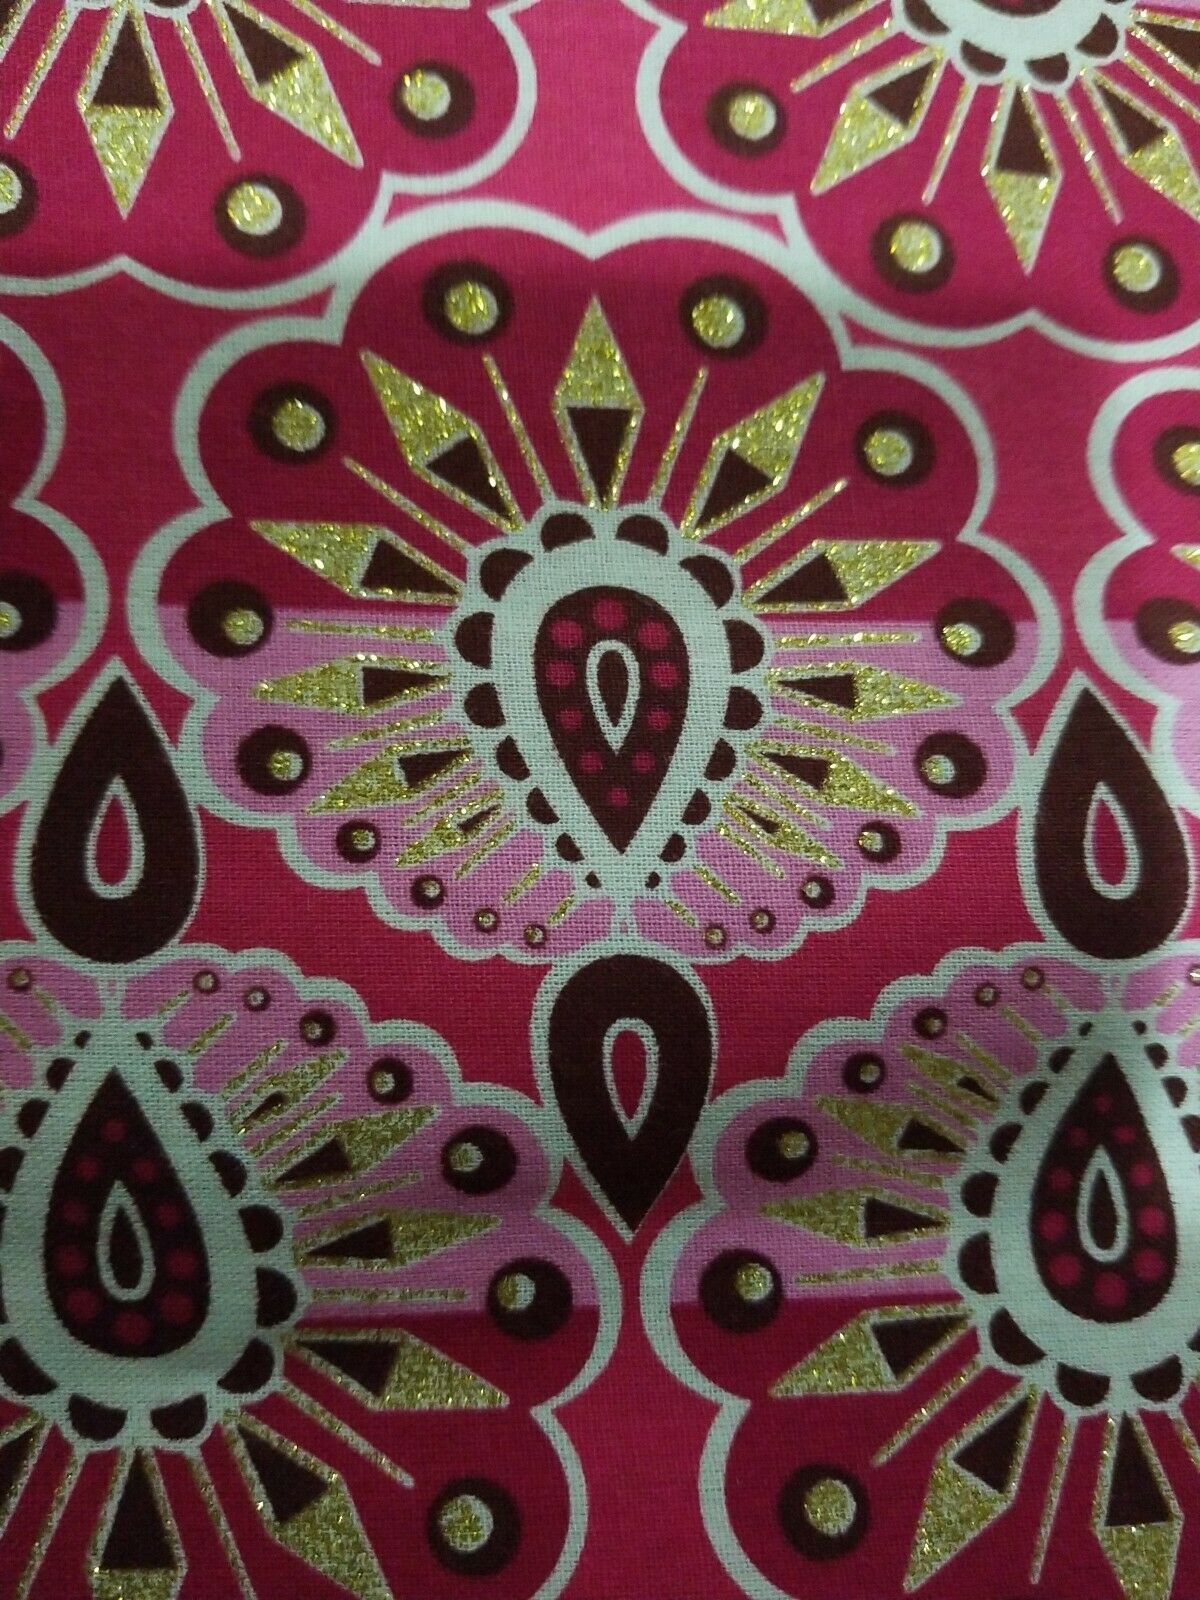 High fashion MULTICOLOR African Wax Print in Pink  Fabric ~2yds×22"~$11